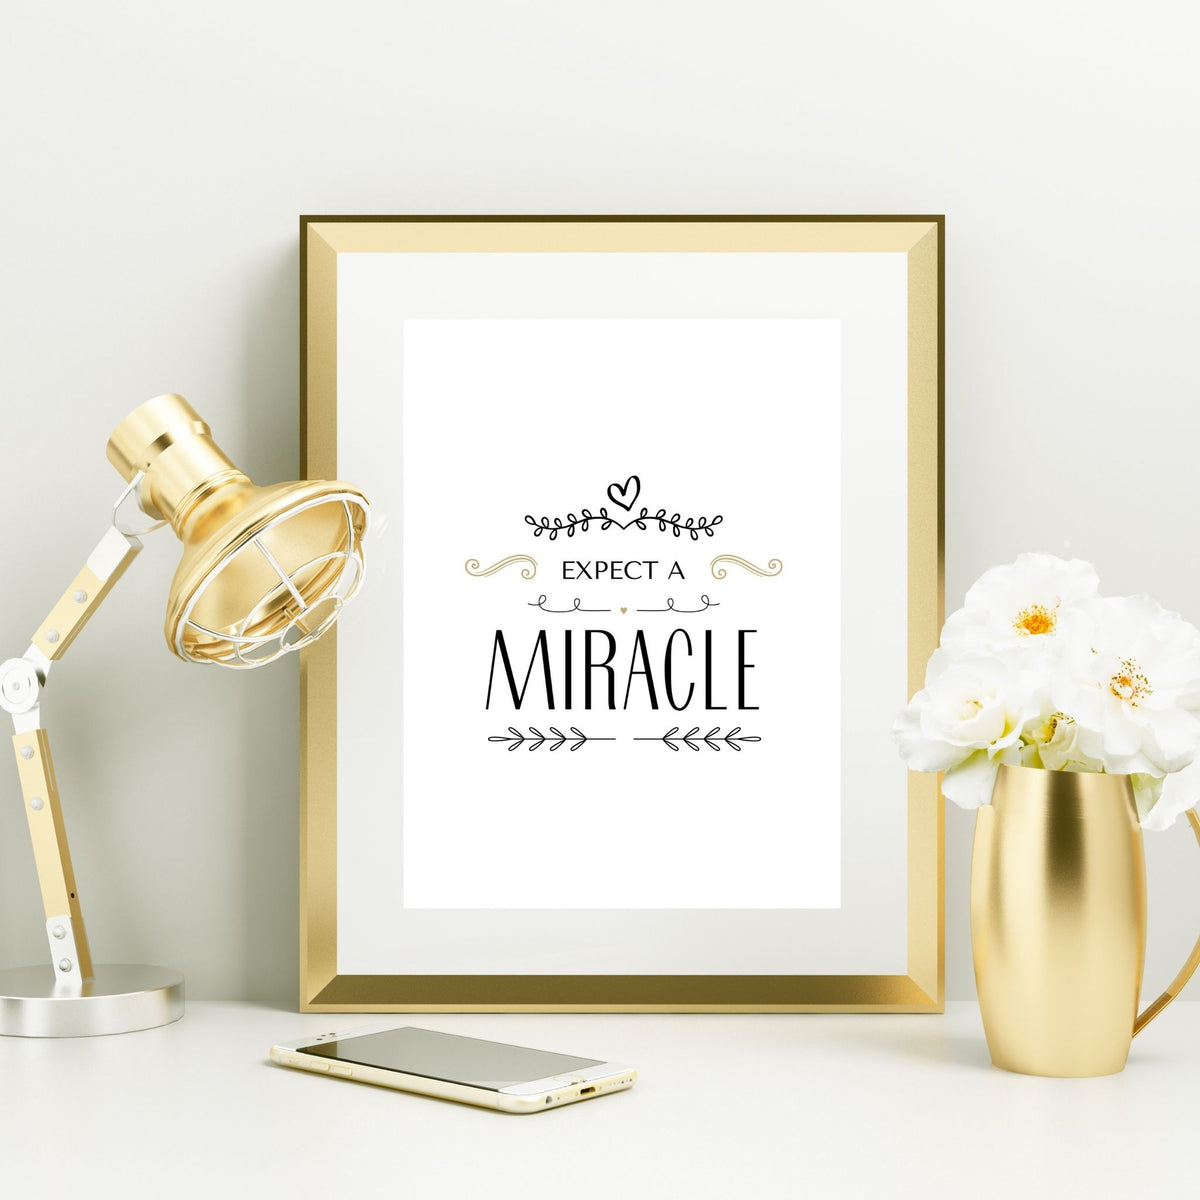 Expect a Miracle (Printable Art)